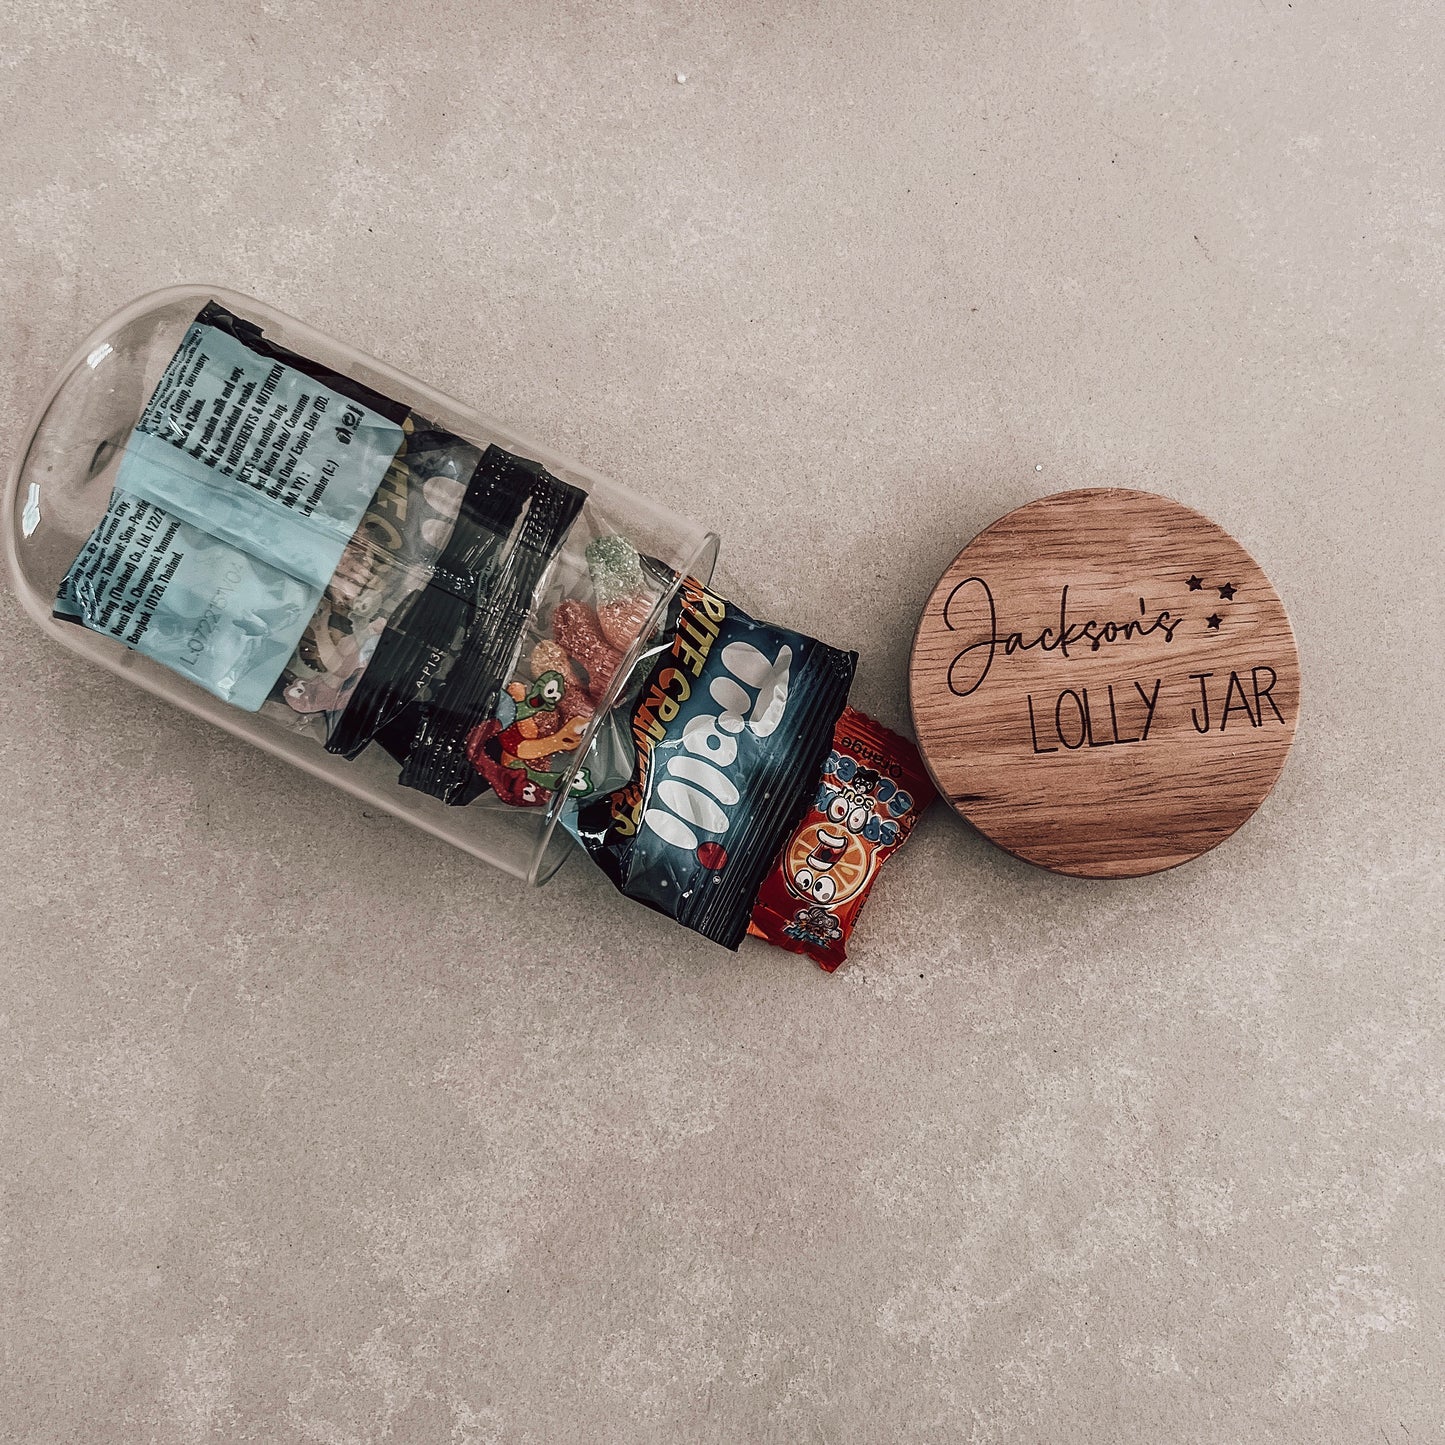 The Personalised Lolly Jar